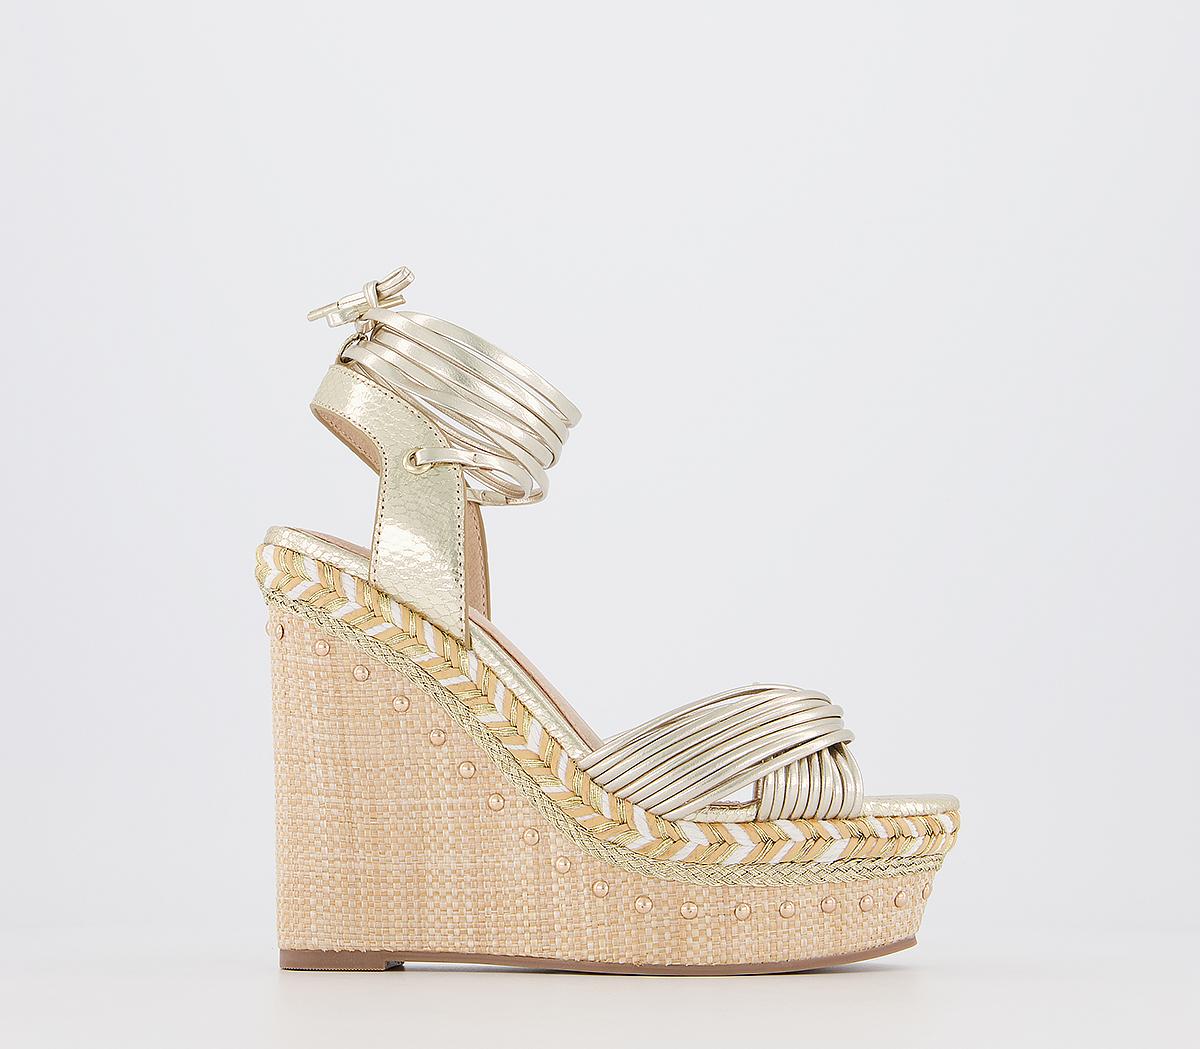 OFFICEHundred Dollar Glam Ankle Tie WedgesGold Snake Mix